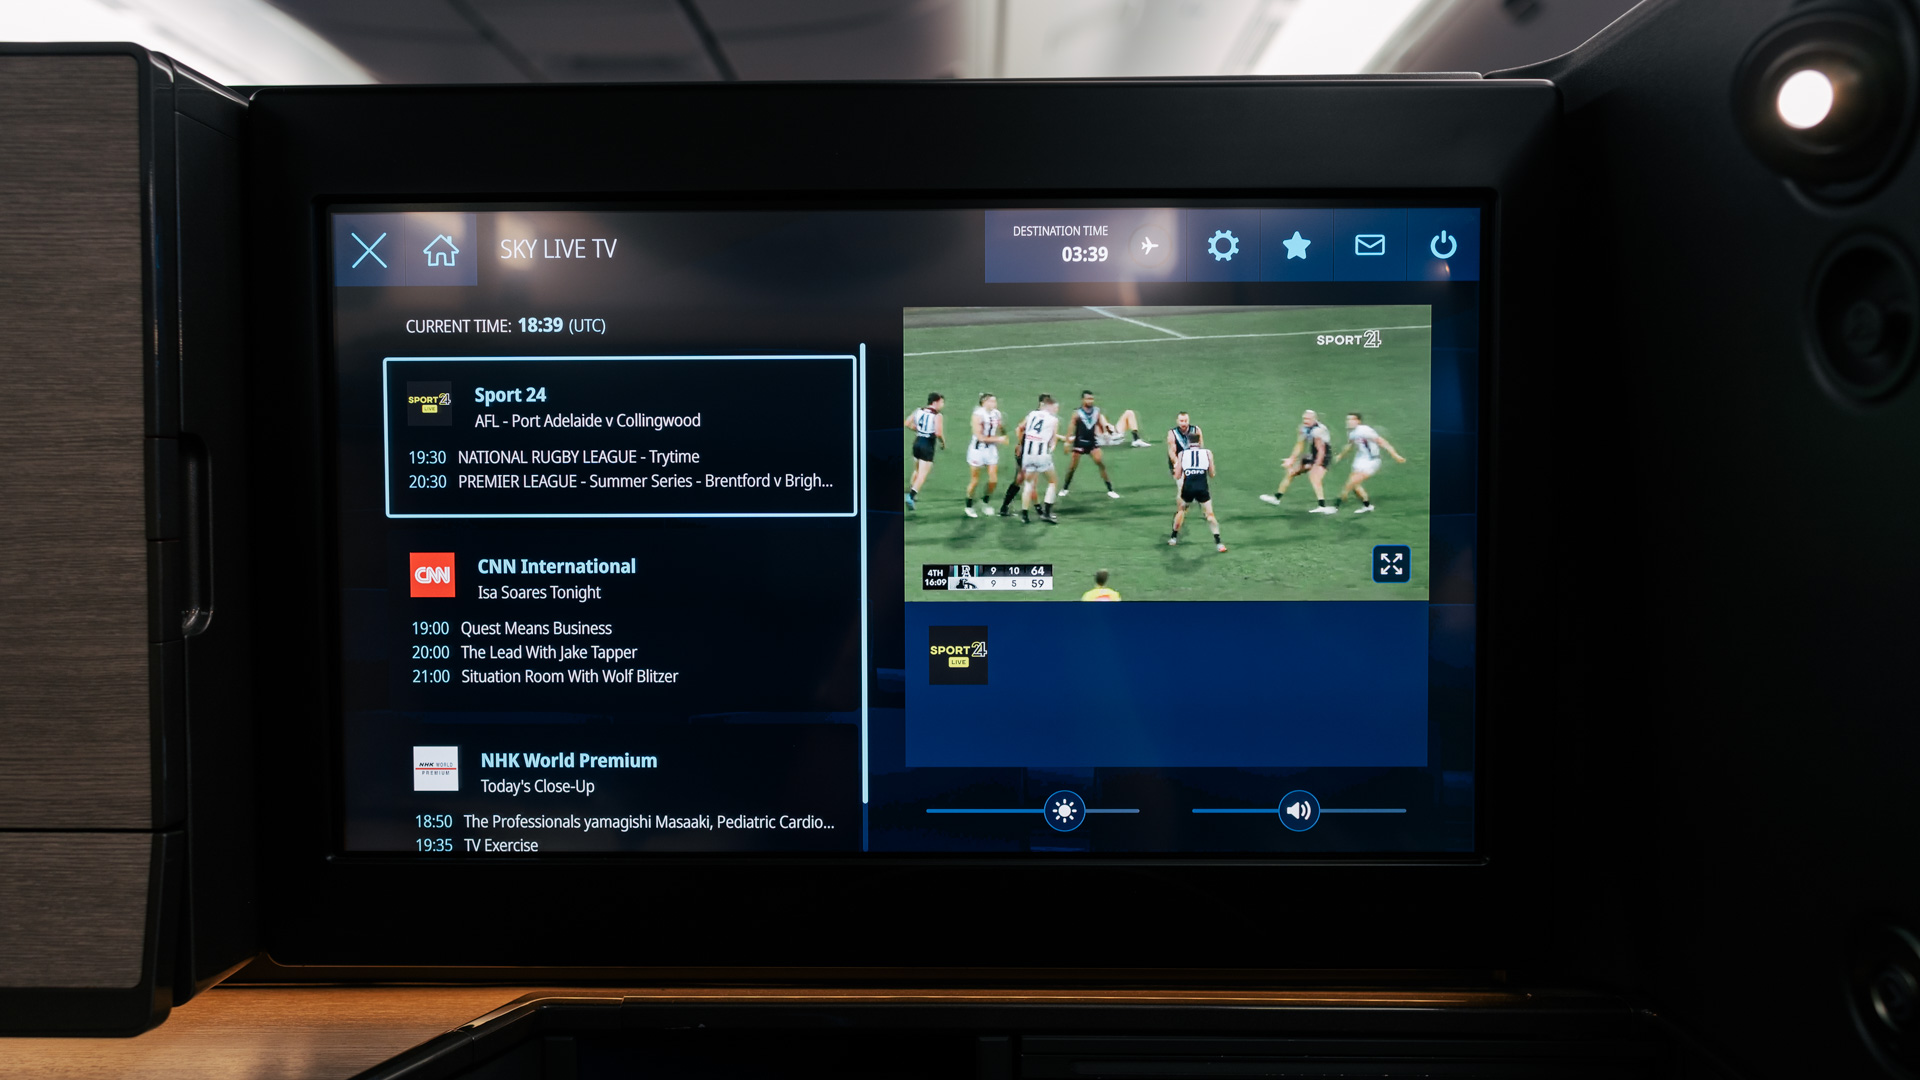 ANA Boeing 777 Business Class live sports